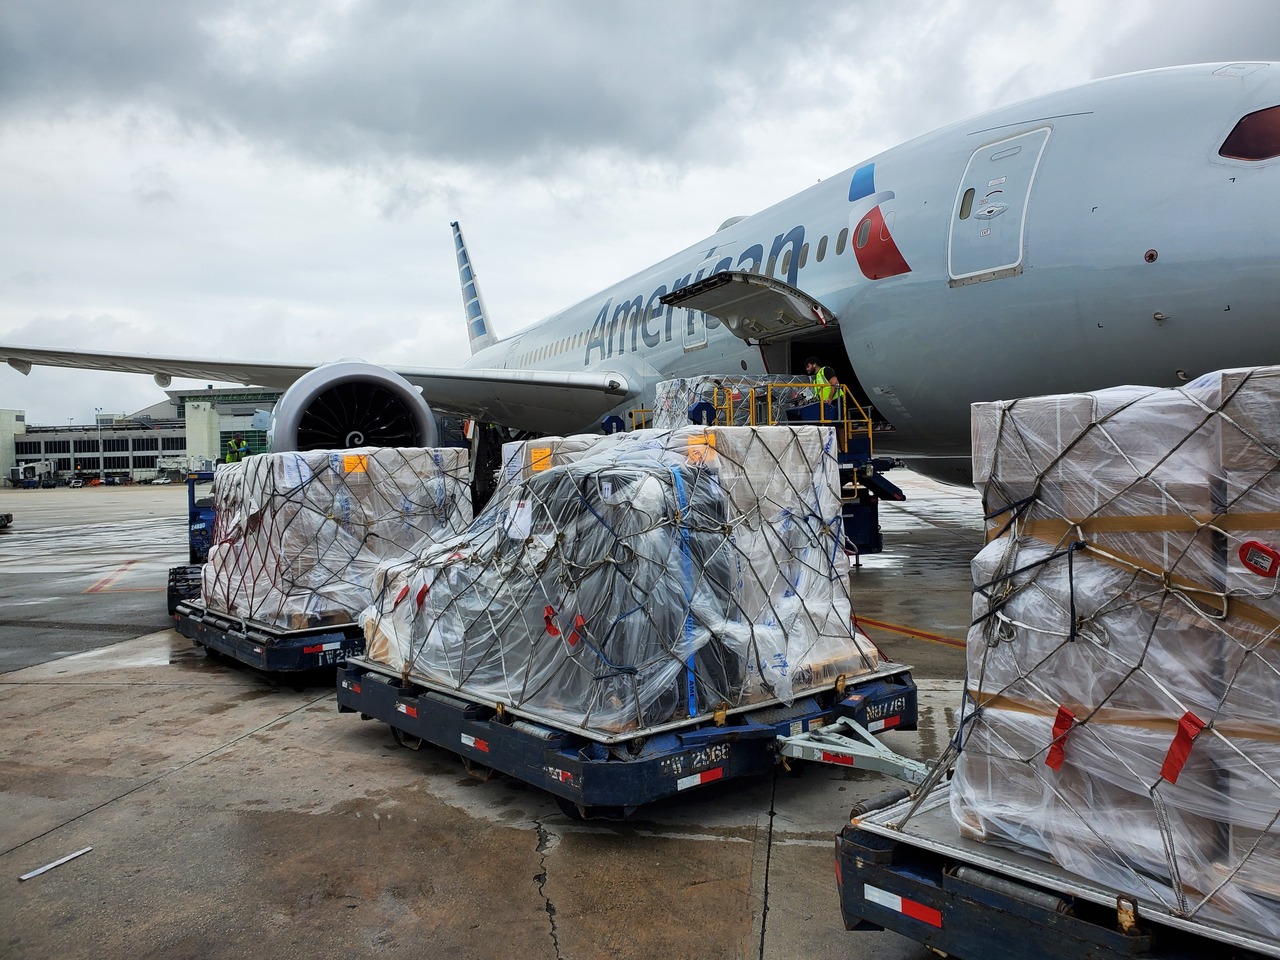 An American Airlines Cargo aircraft is loaded with supplies bound for Haiti